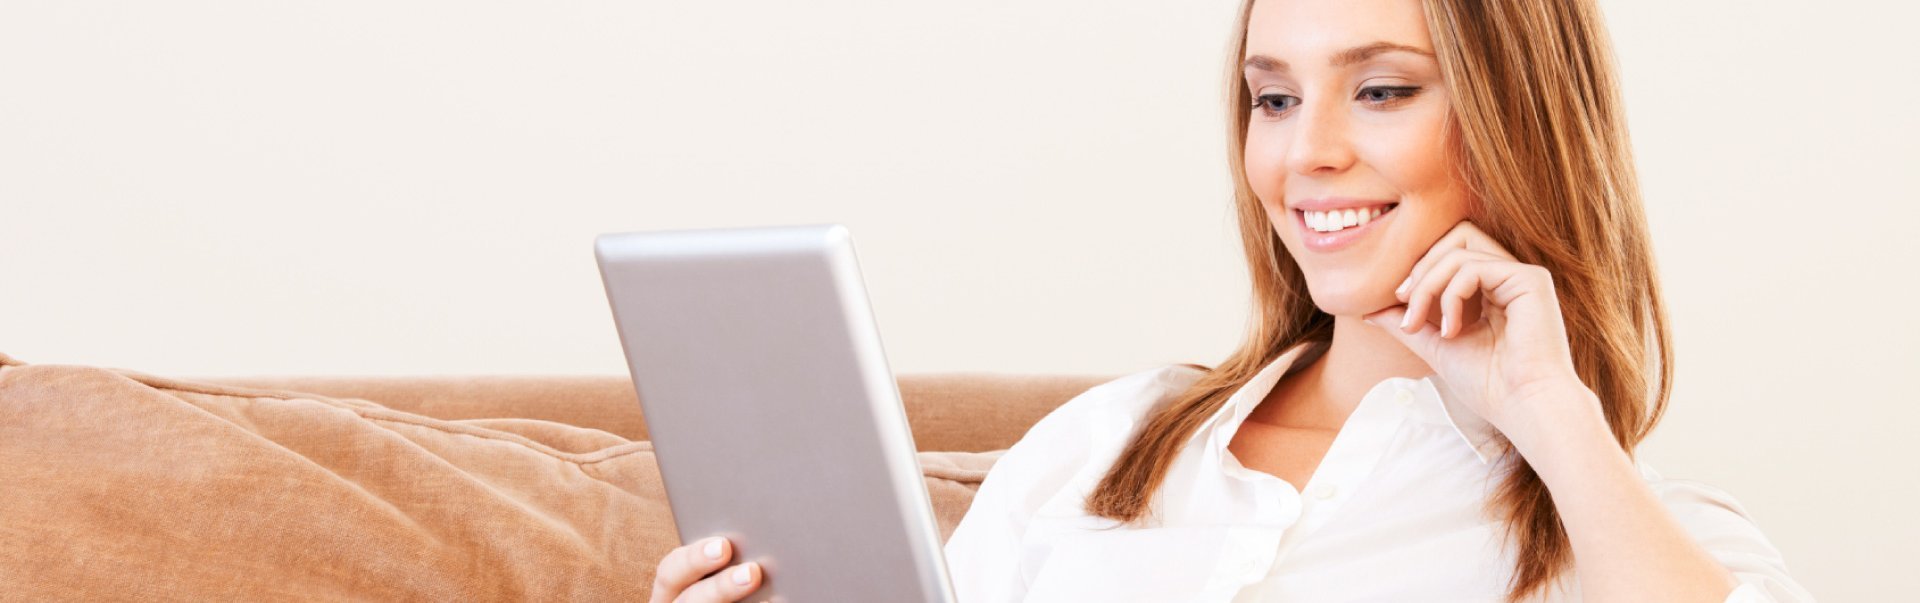 woman on couch using tablet